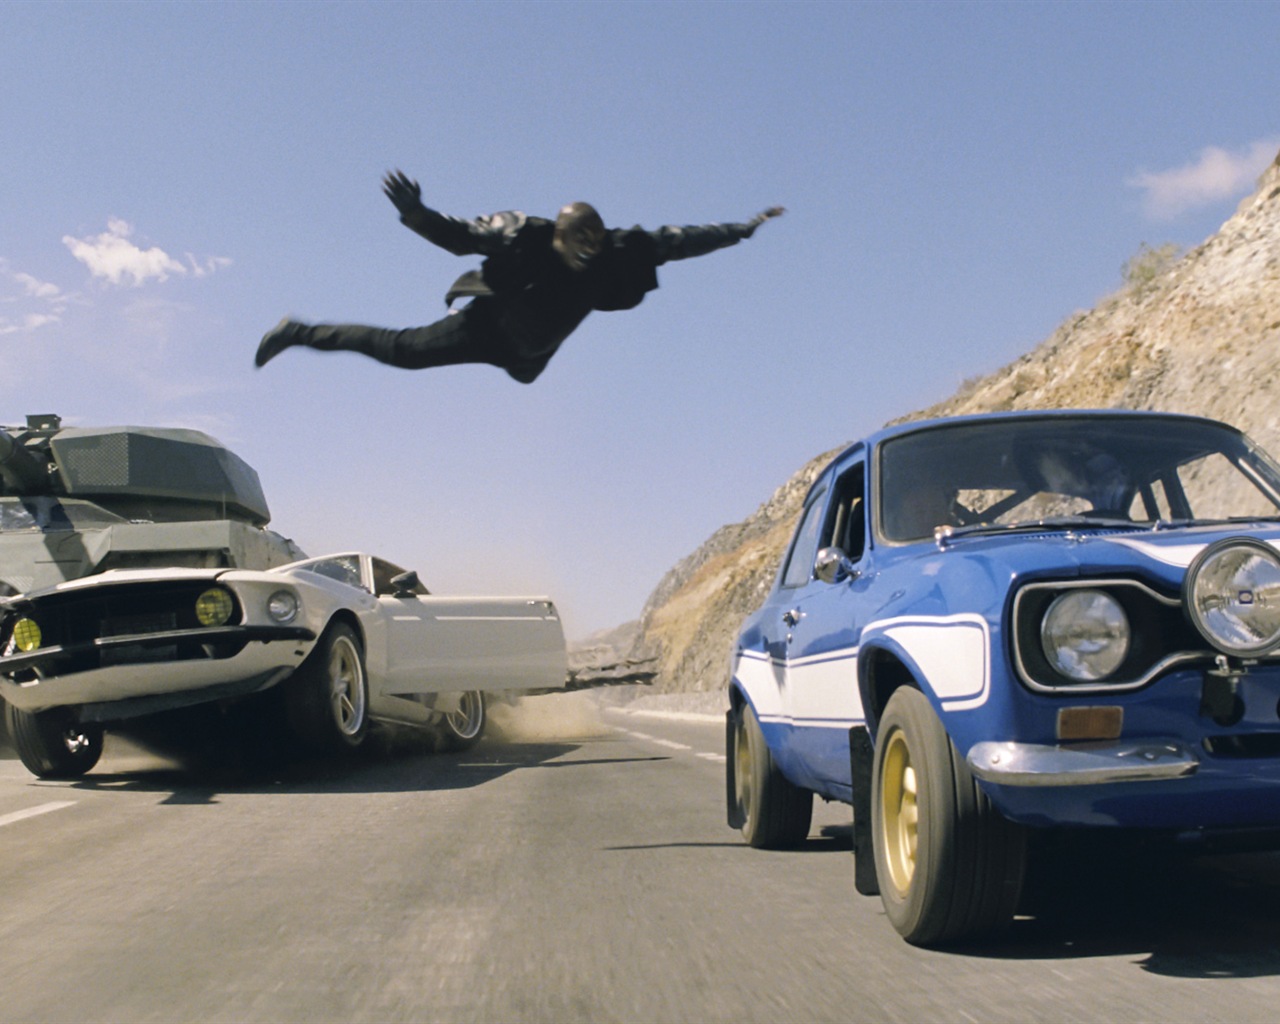 Fast And Furious 6 HD movie wallpapers #14 - 1280x1024